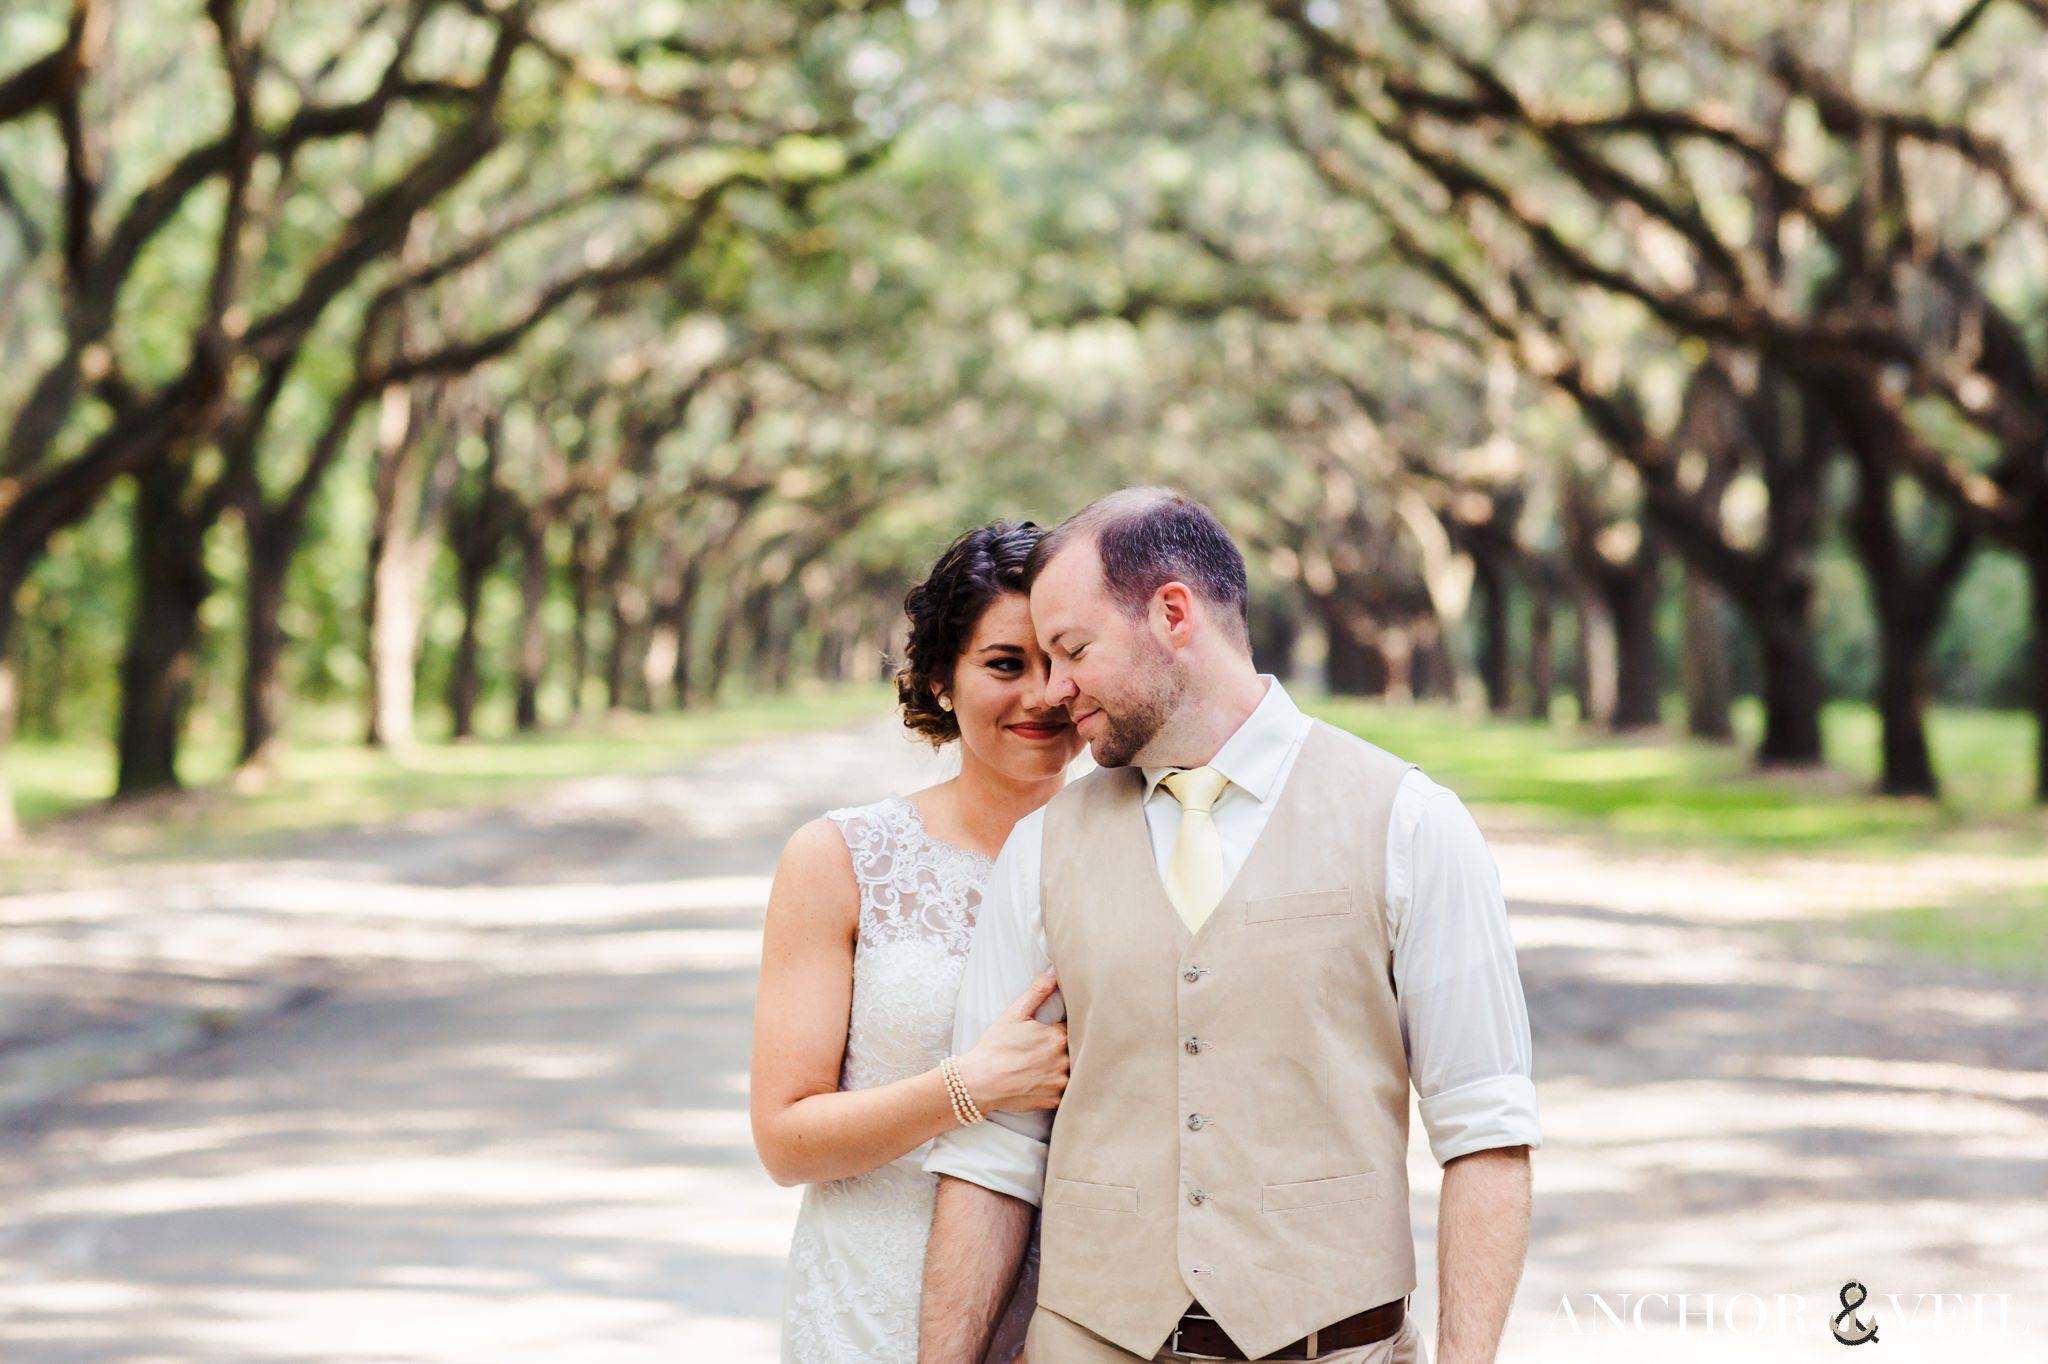 under the trees and holding each other in the middle during their Forsyth Park Wedding Elopement